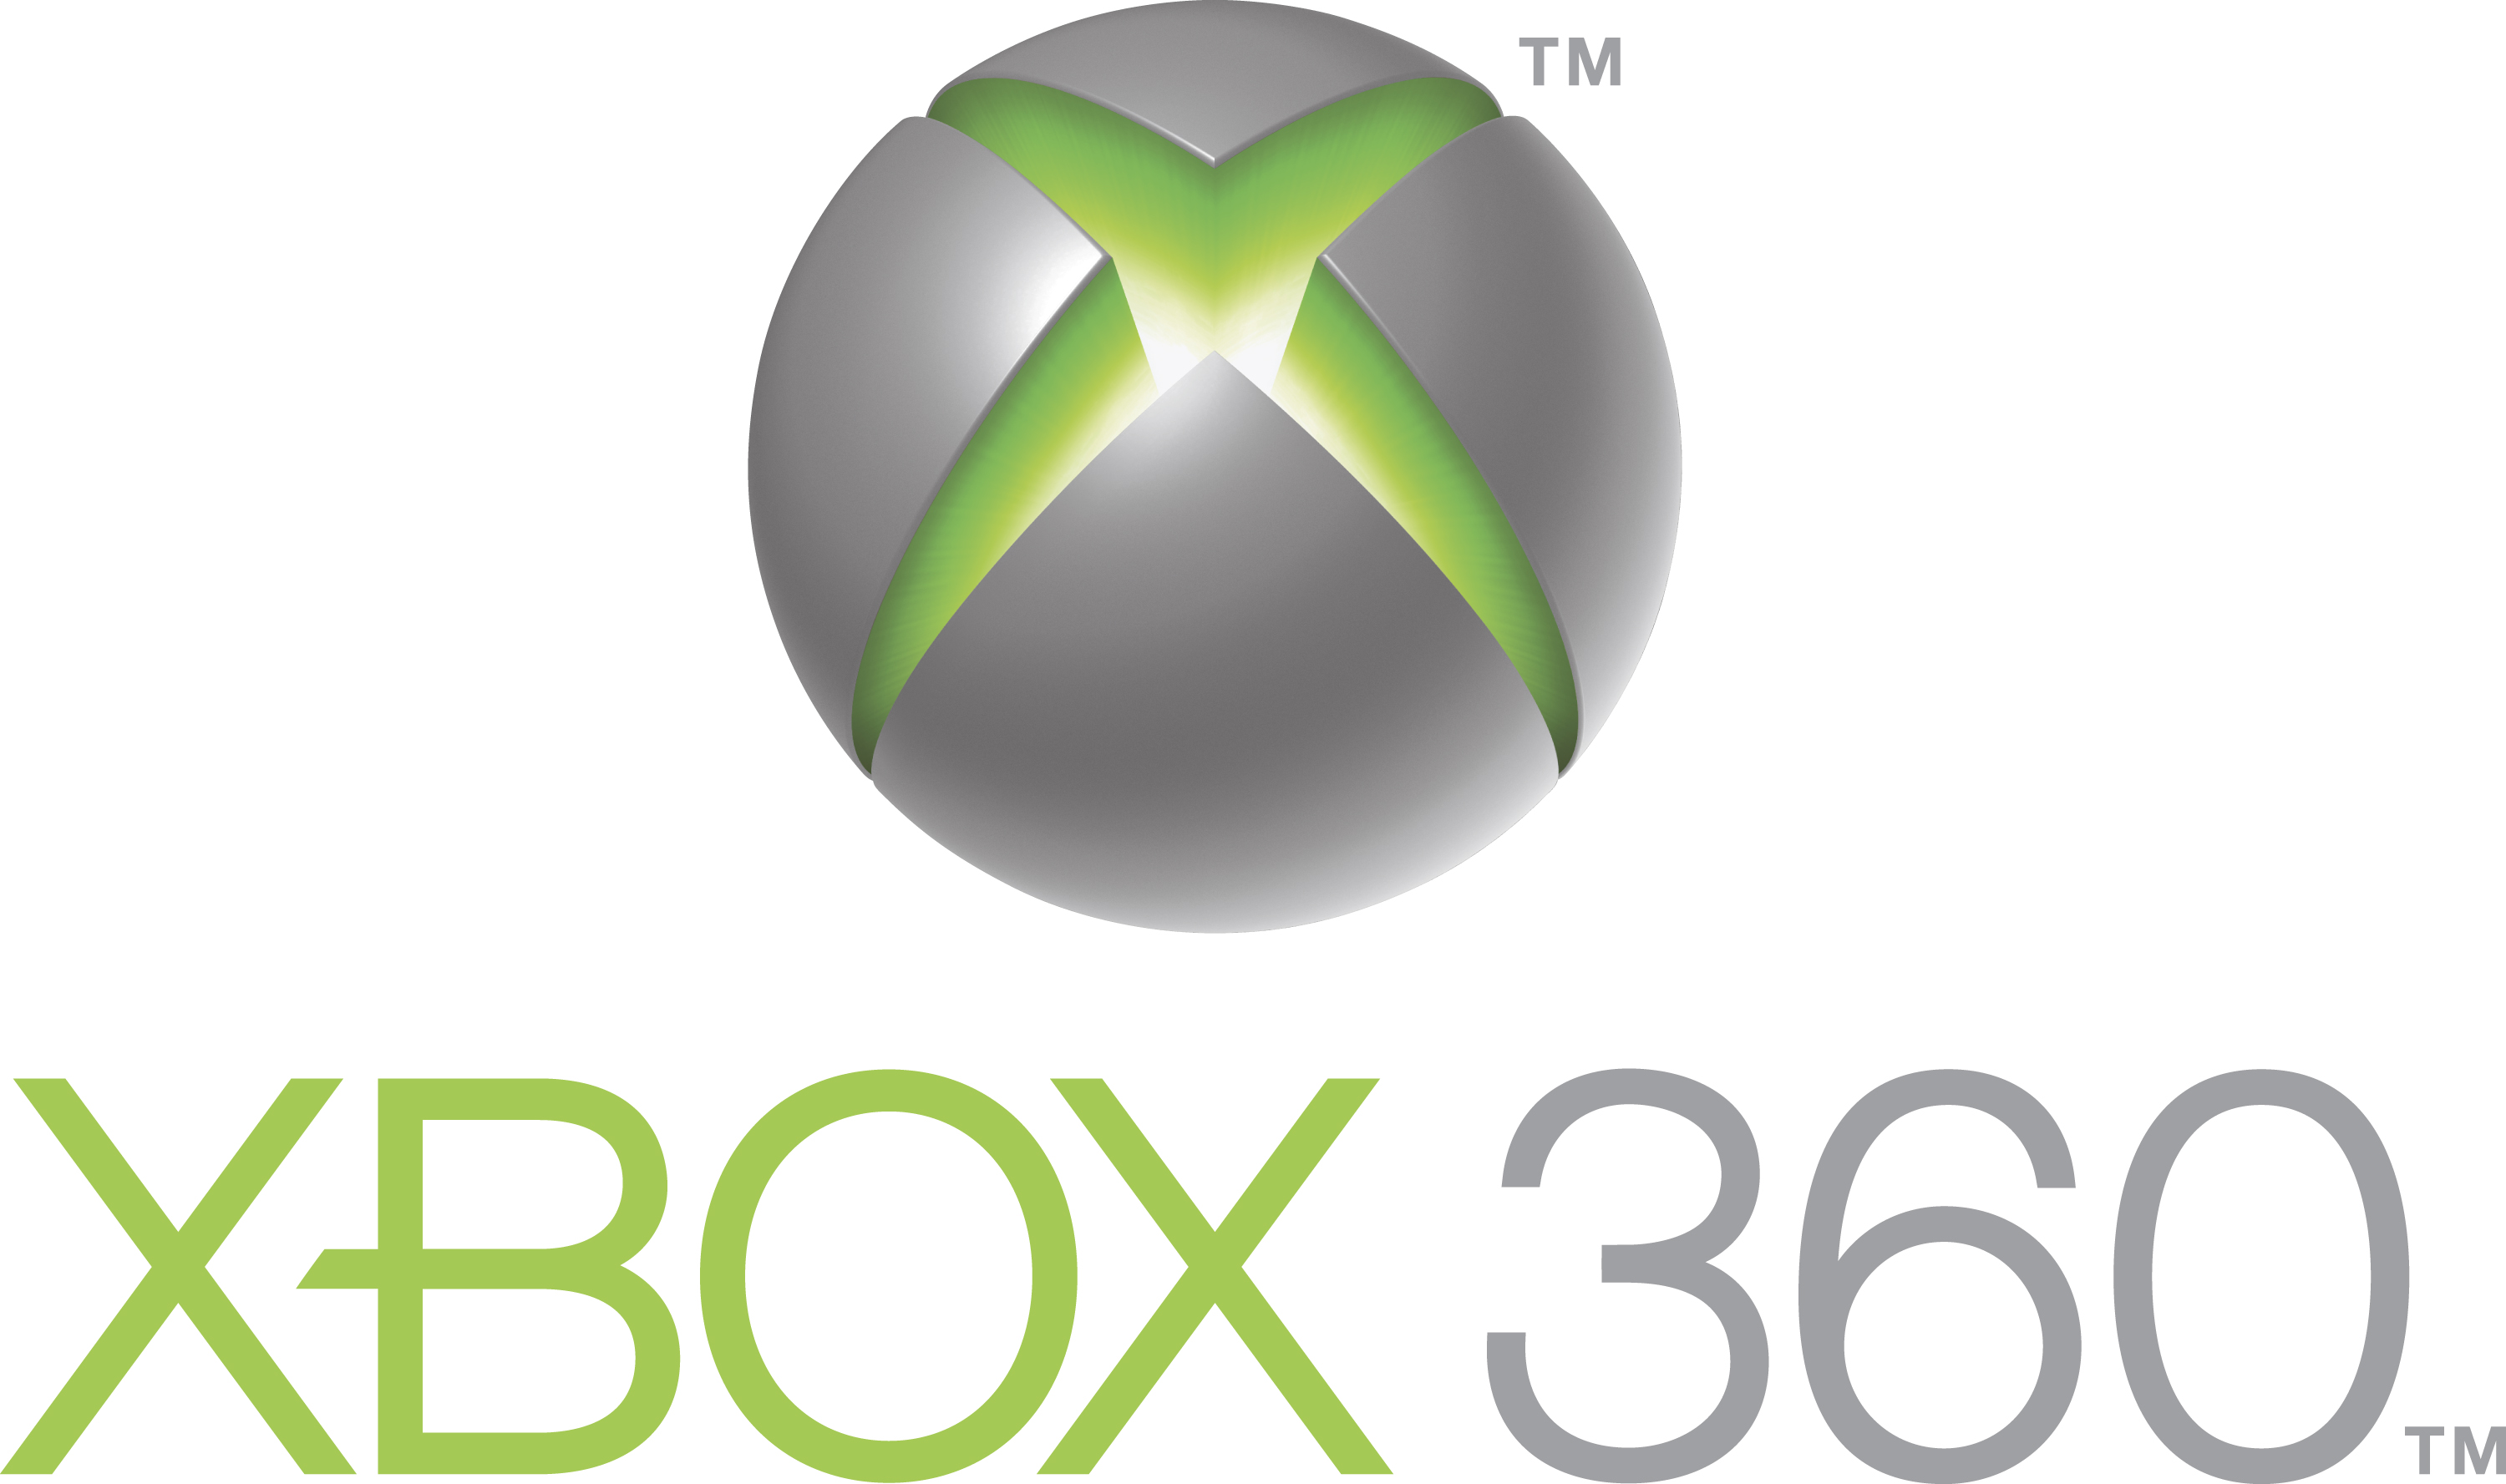 Who is the inventor of the Xbox 360?